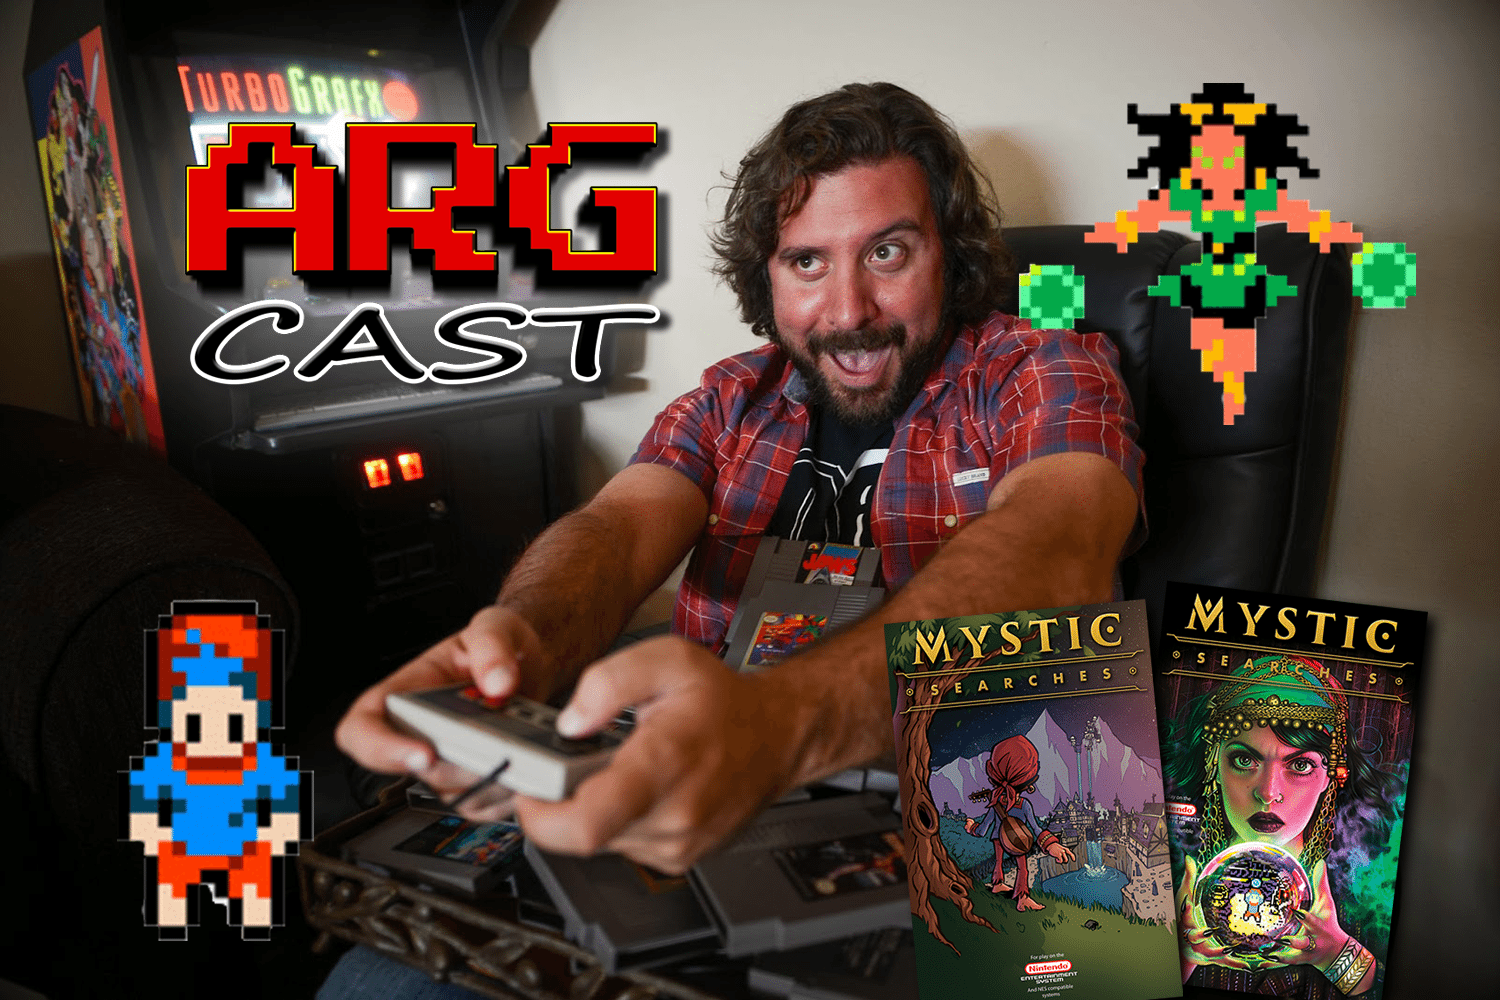 ARGcast #42: Mystic Searches and The New 8-Bit Heroes with Joe Granato